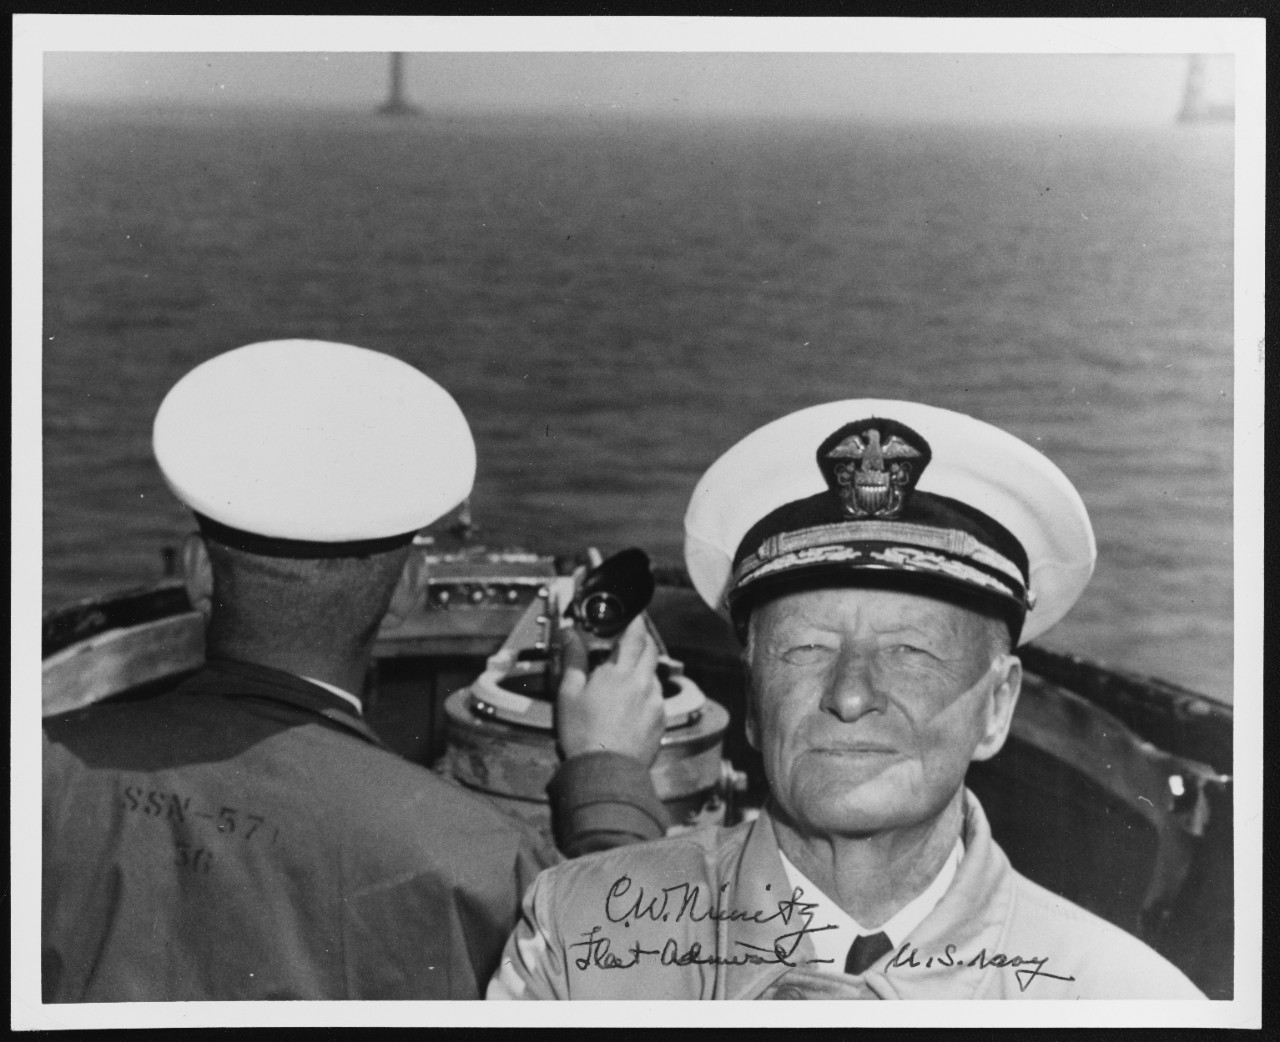 Fleet Admiral Nimitz, USN, in the Conning Tower of USS NAUTILUS (SSN-571)